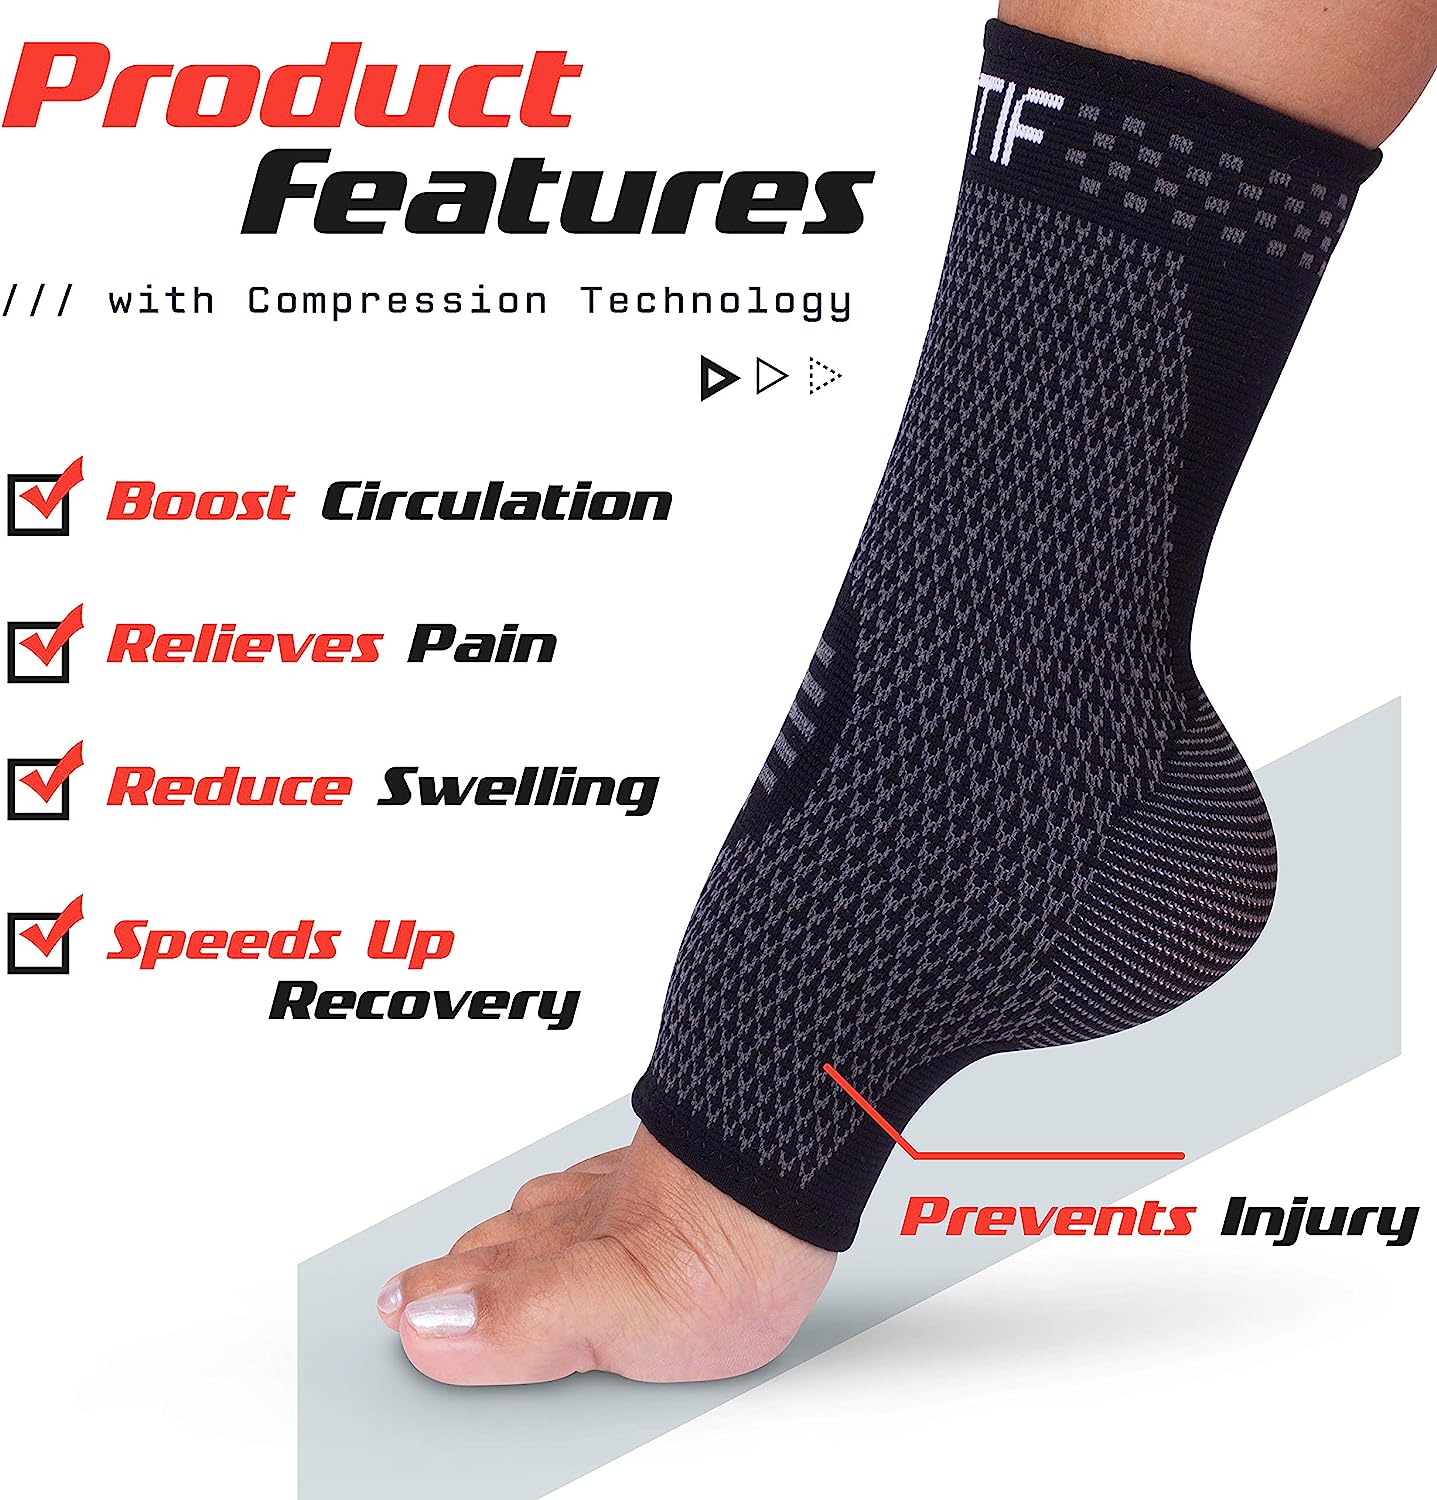 Actif Sports Ankle Compression Sleeve - Breathable Ankle Sleeve to Speed Up Recovery, Prevent Injury, Reduce Swelling, Achilles Tendon and Plantar Fasciitis Support, and More (Large US Size 10-13)